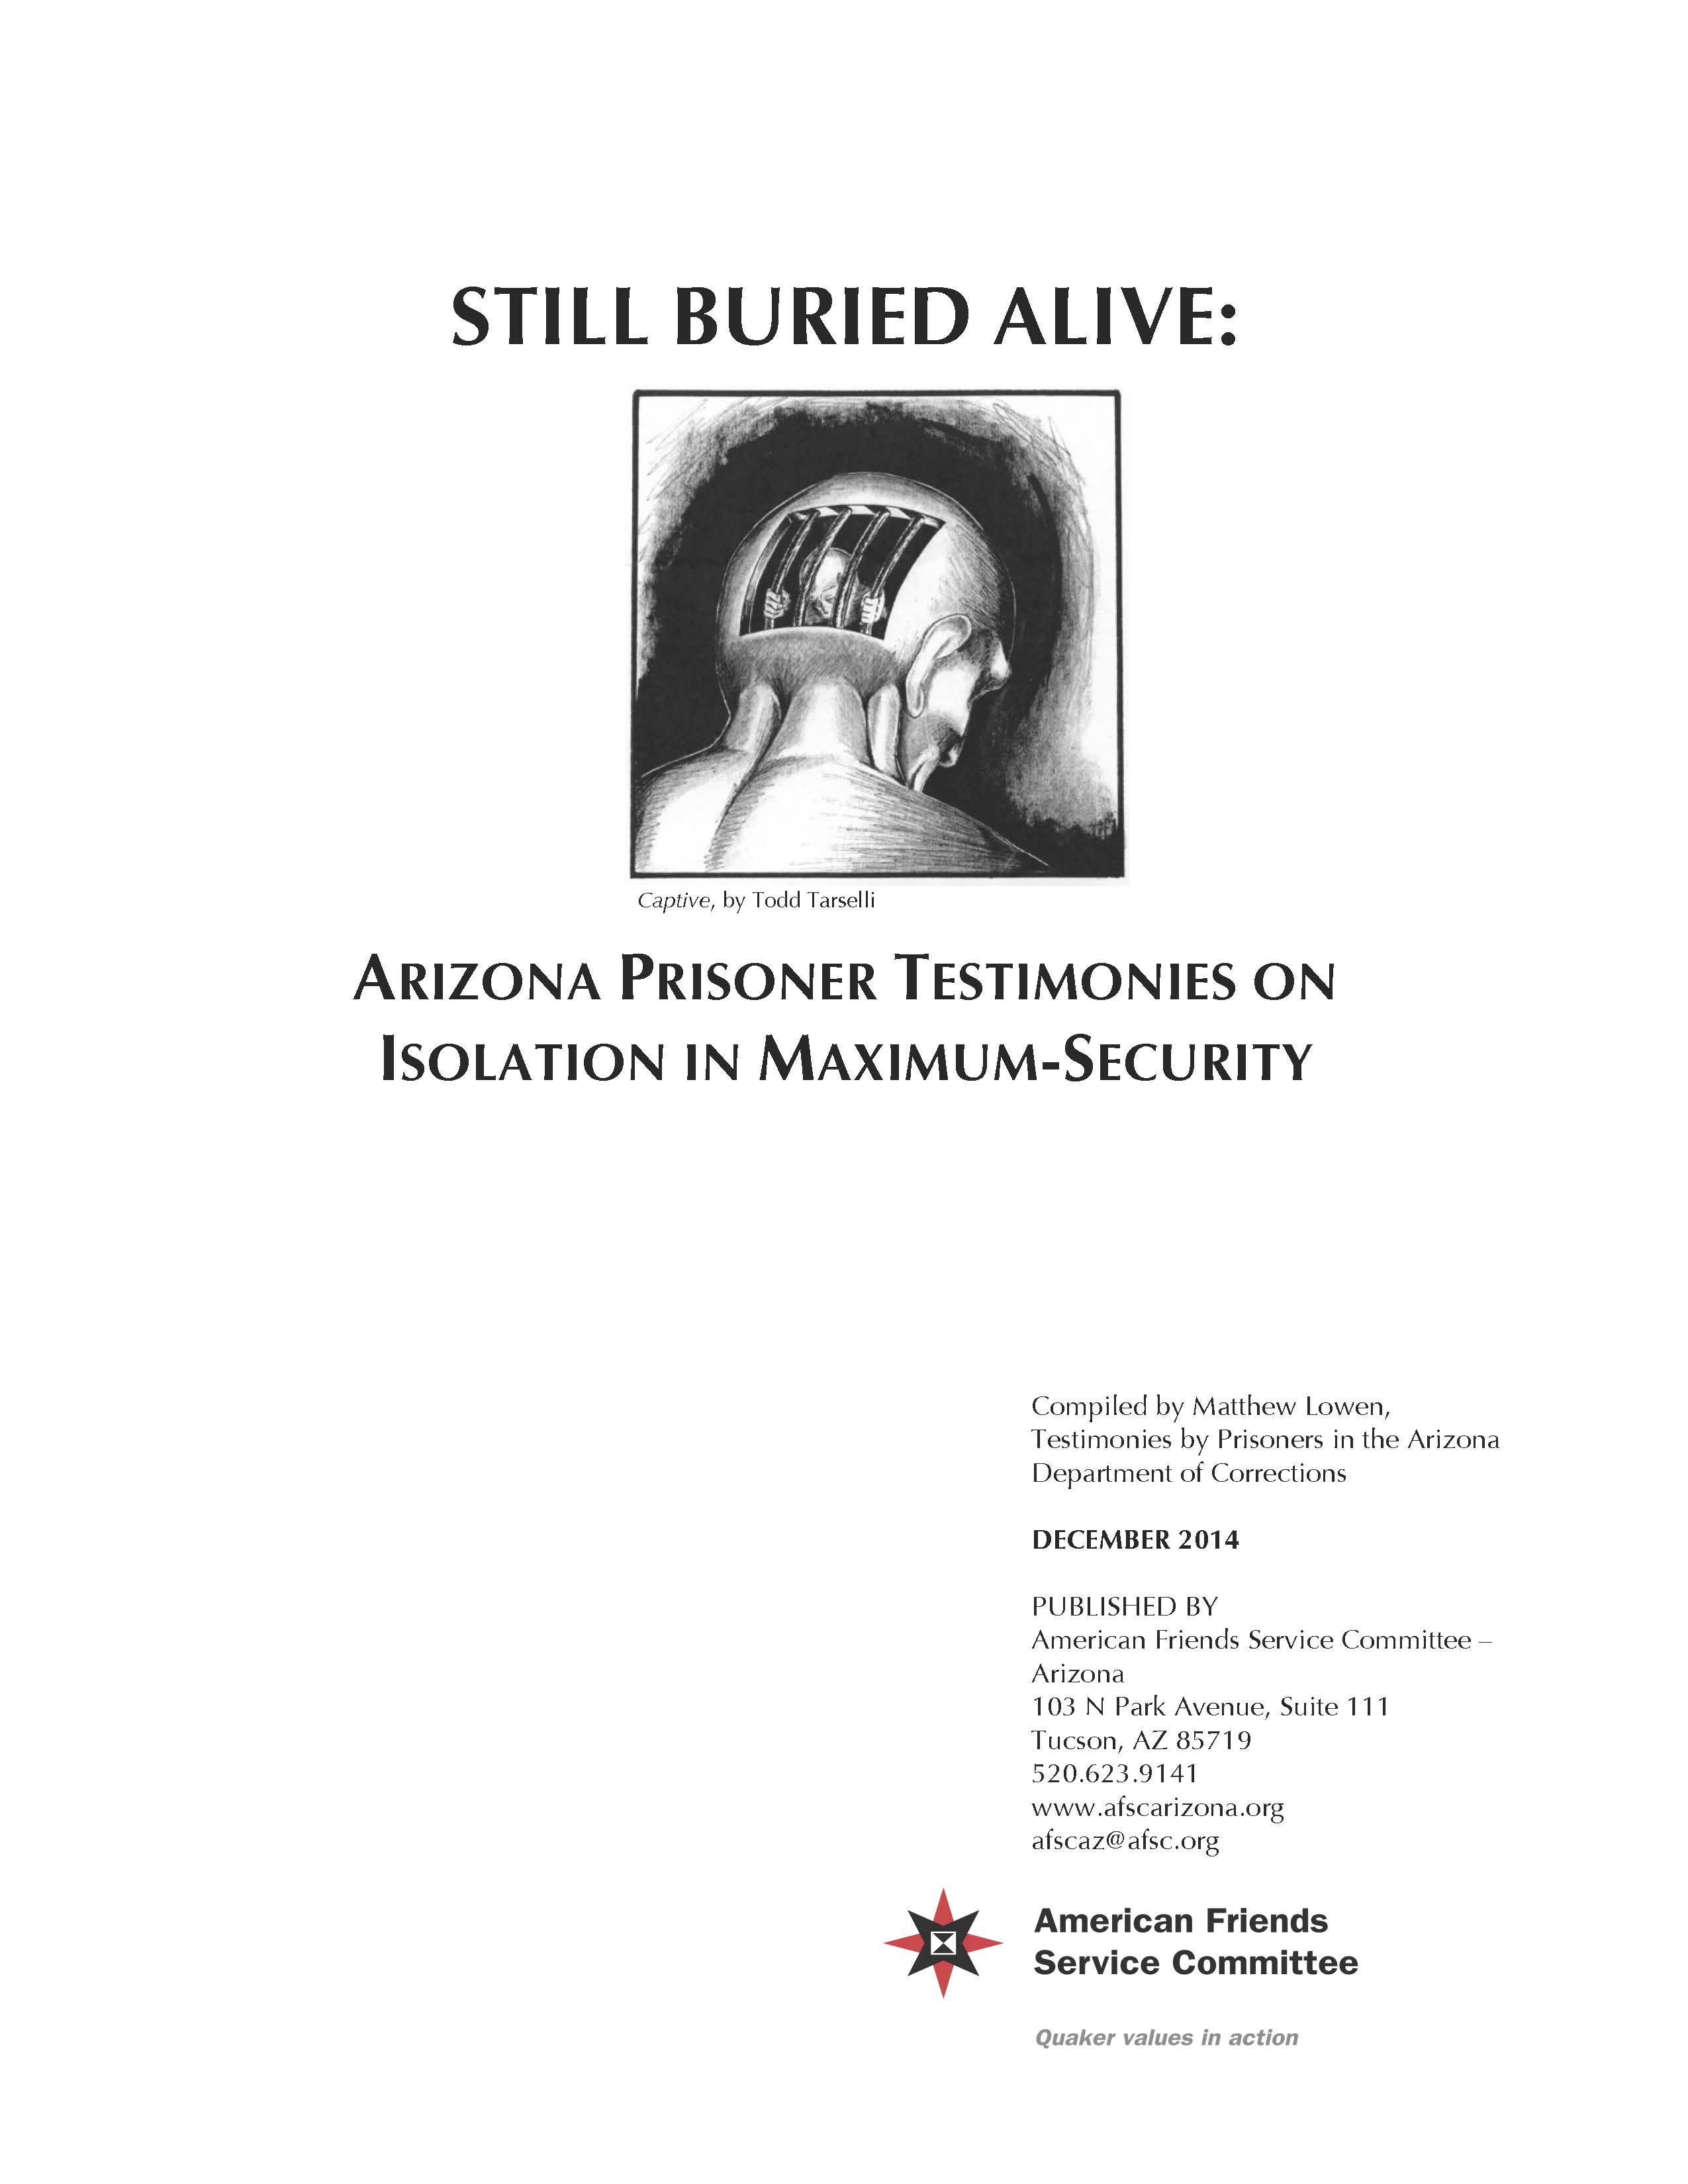 STILL BURIED ALIVE cover page